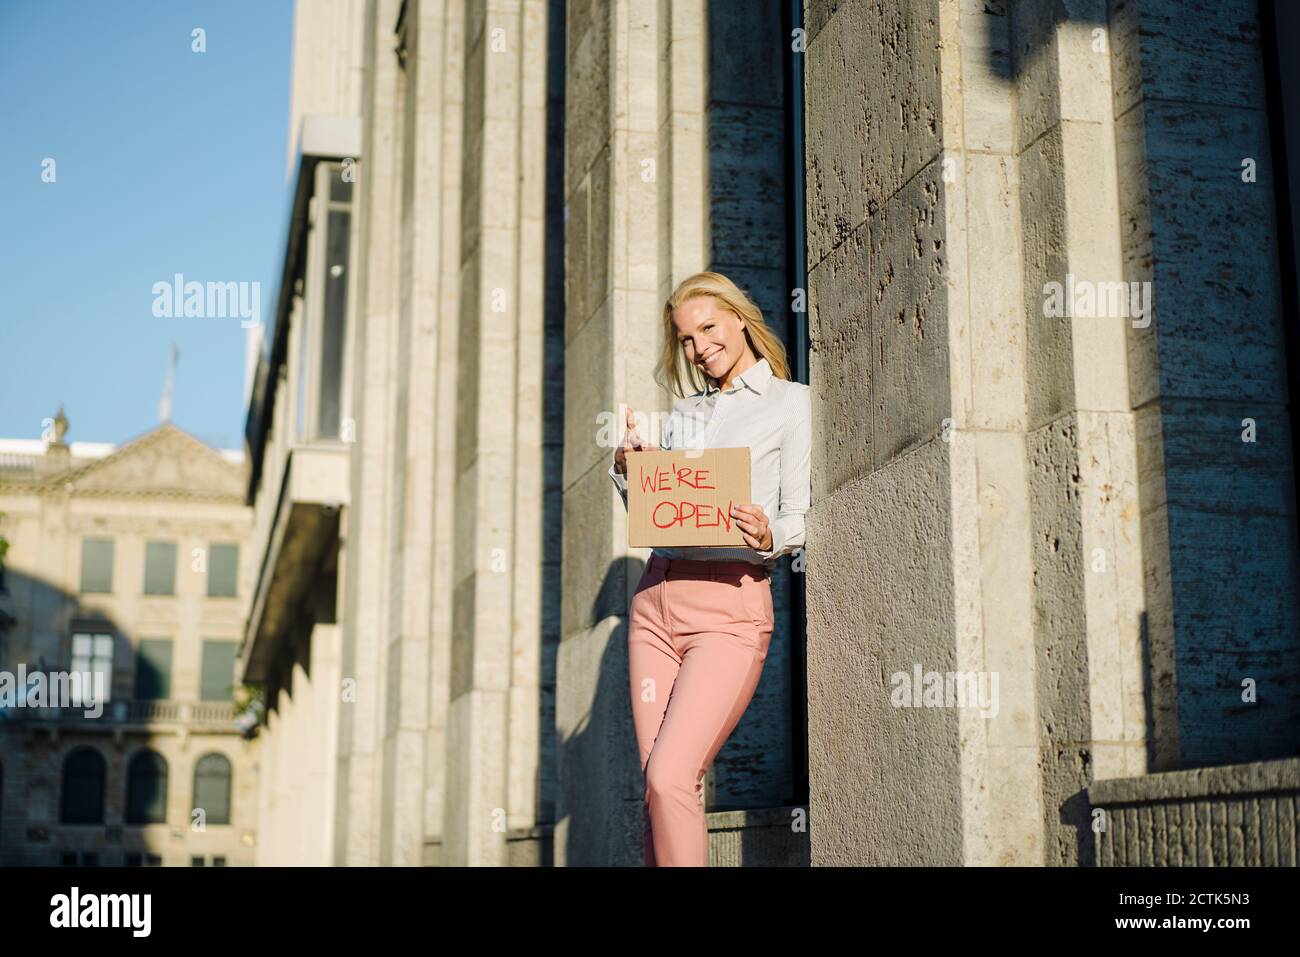 Smiling female professional holding open sign cardboard placard by building in financial district Stock Photo